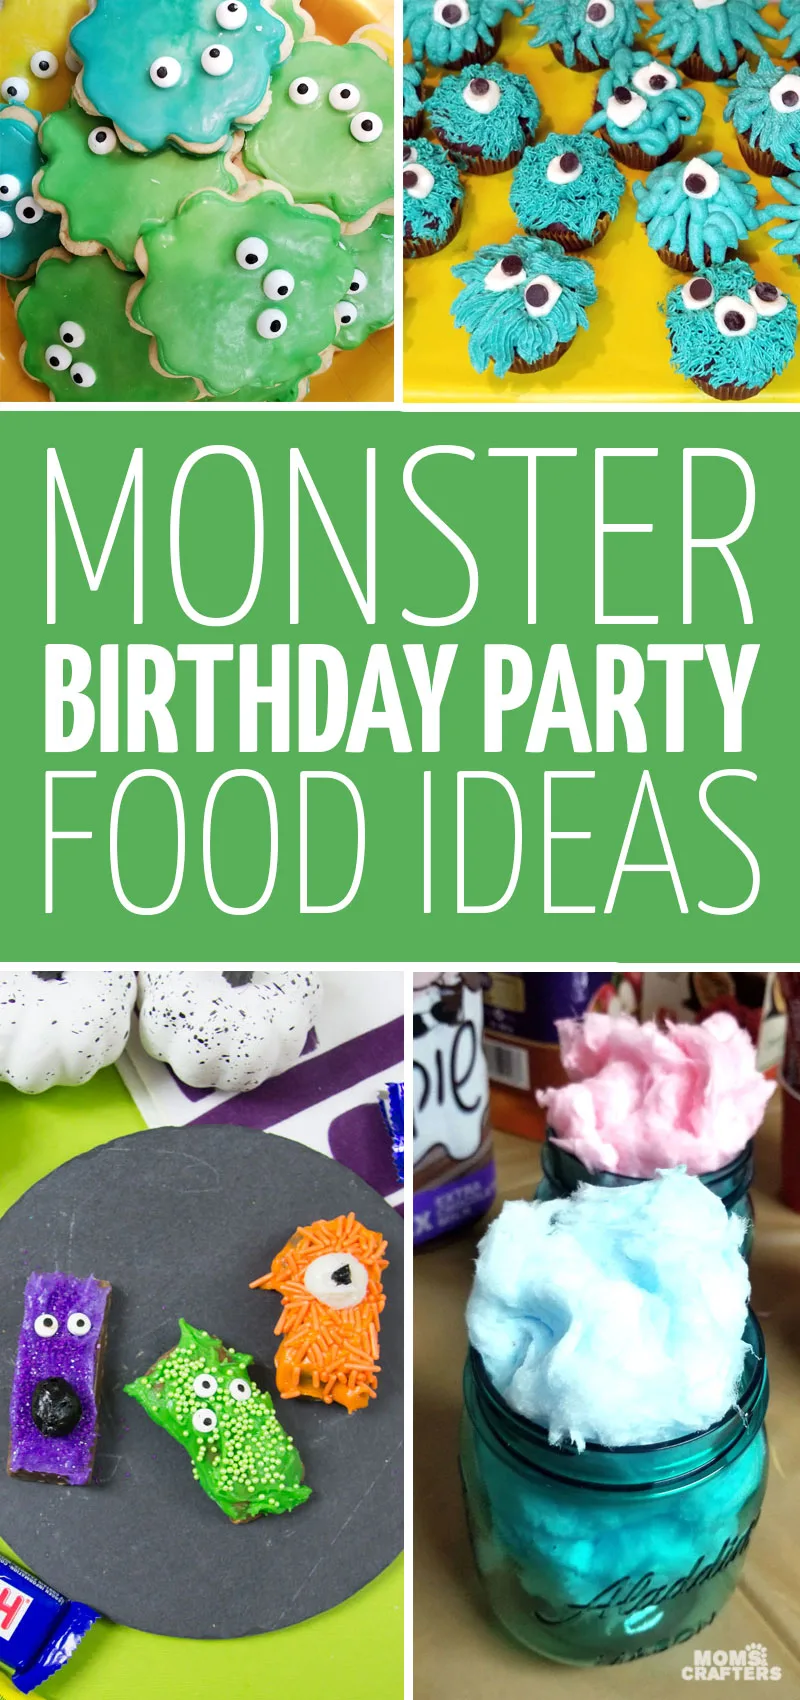 Click for some cool monster birthday party food ideas - perfect for a first, second, third, or fourth birthday theme!